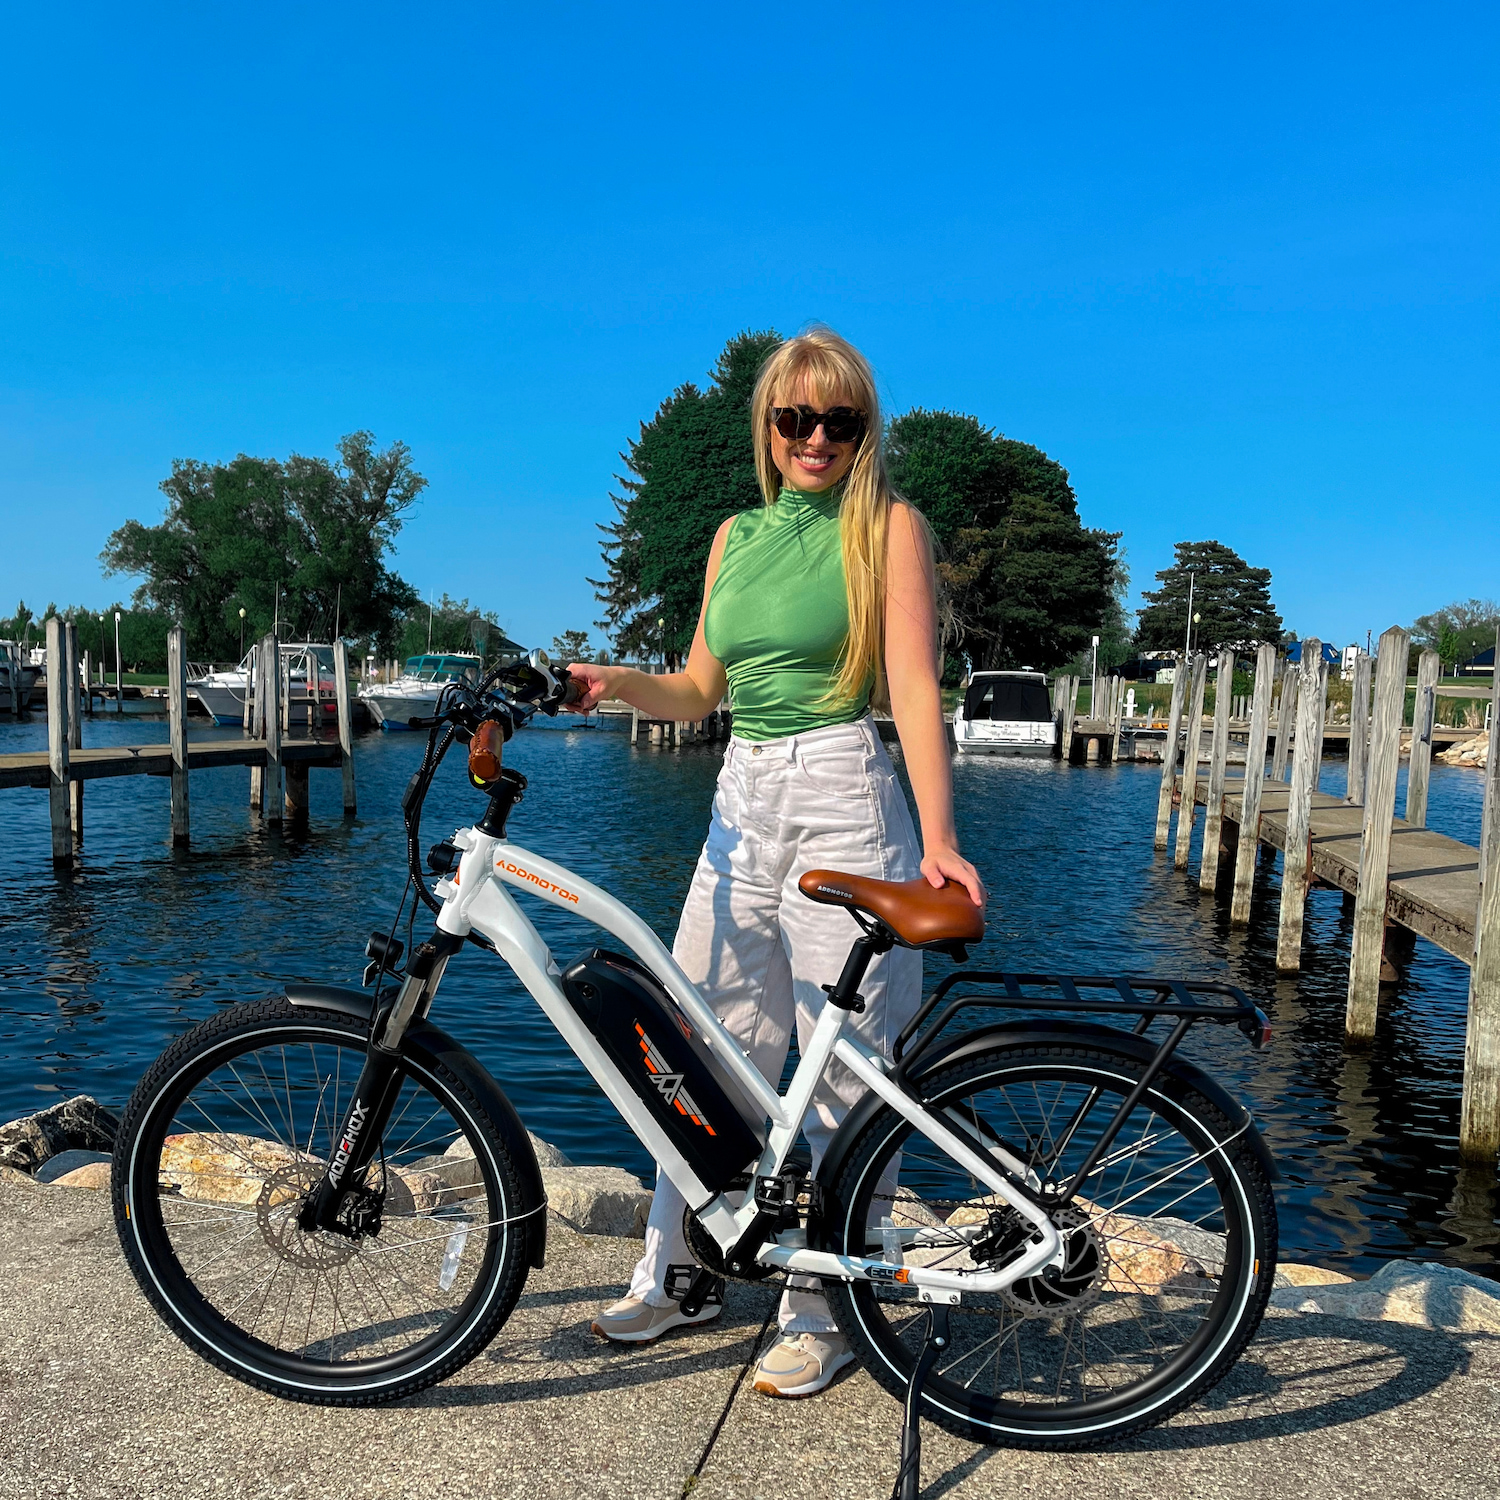 5 Reasons Why Commuting With an E-Bike Is Better Than a Car